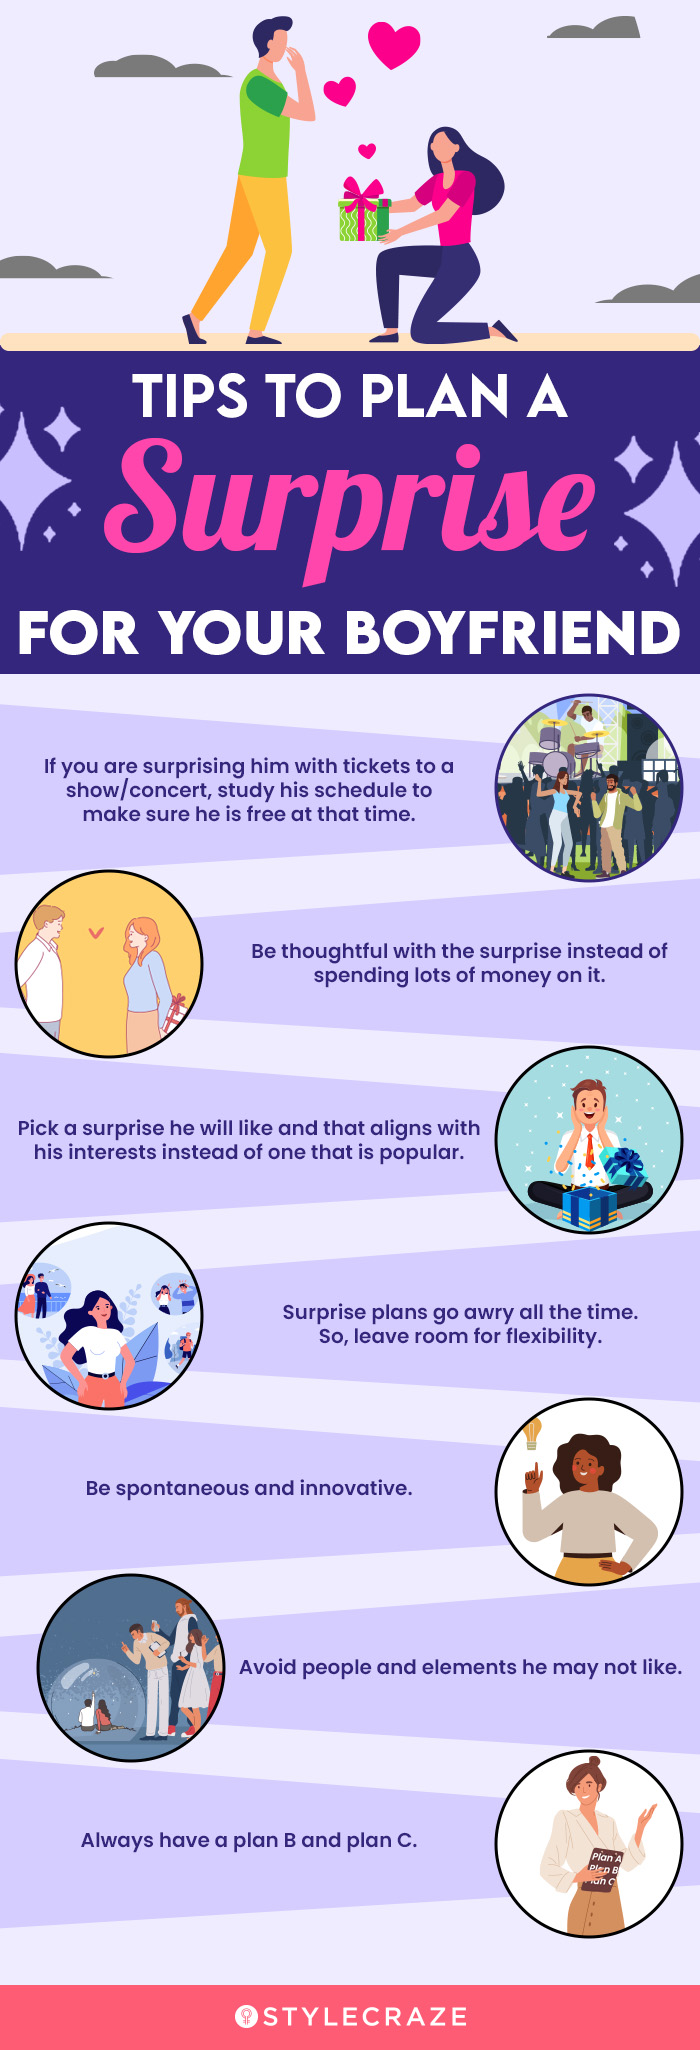 tips to plan a surprise for your boyfriend [infographic]